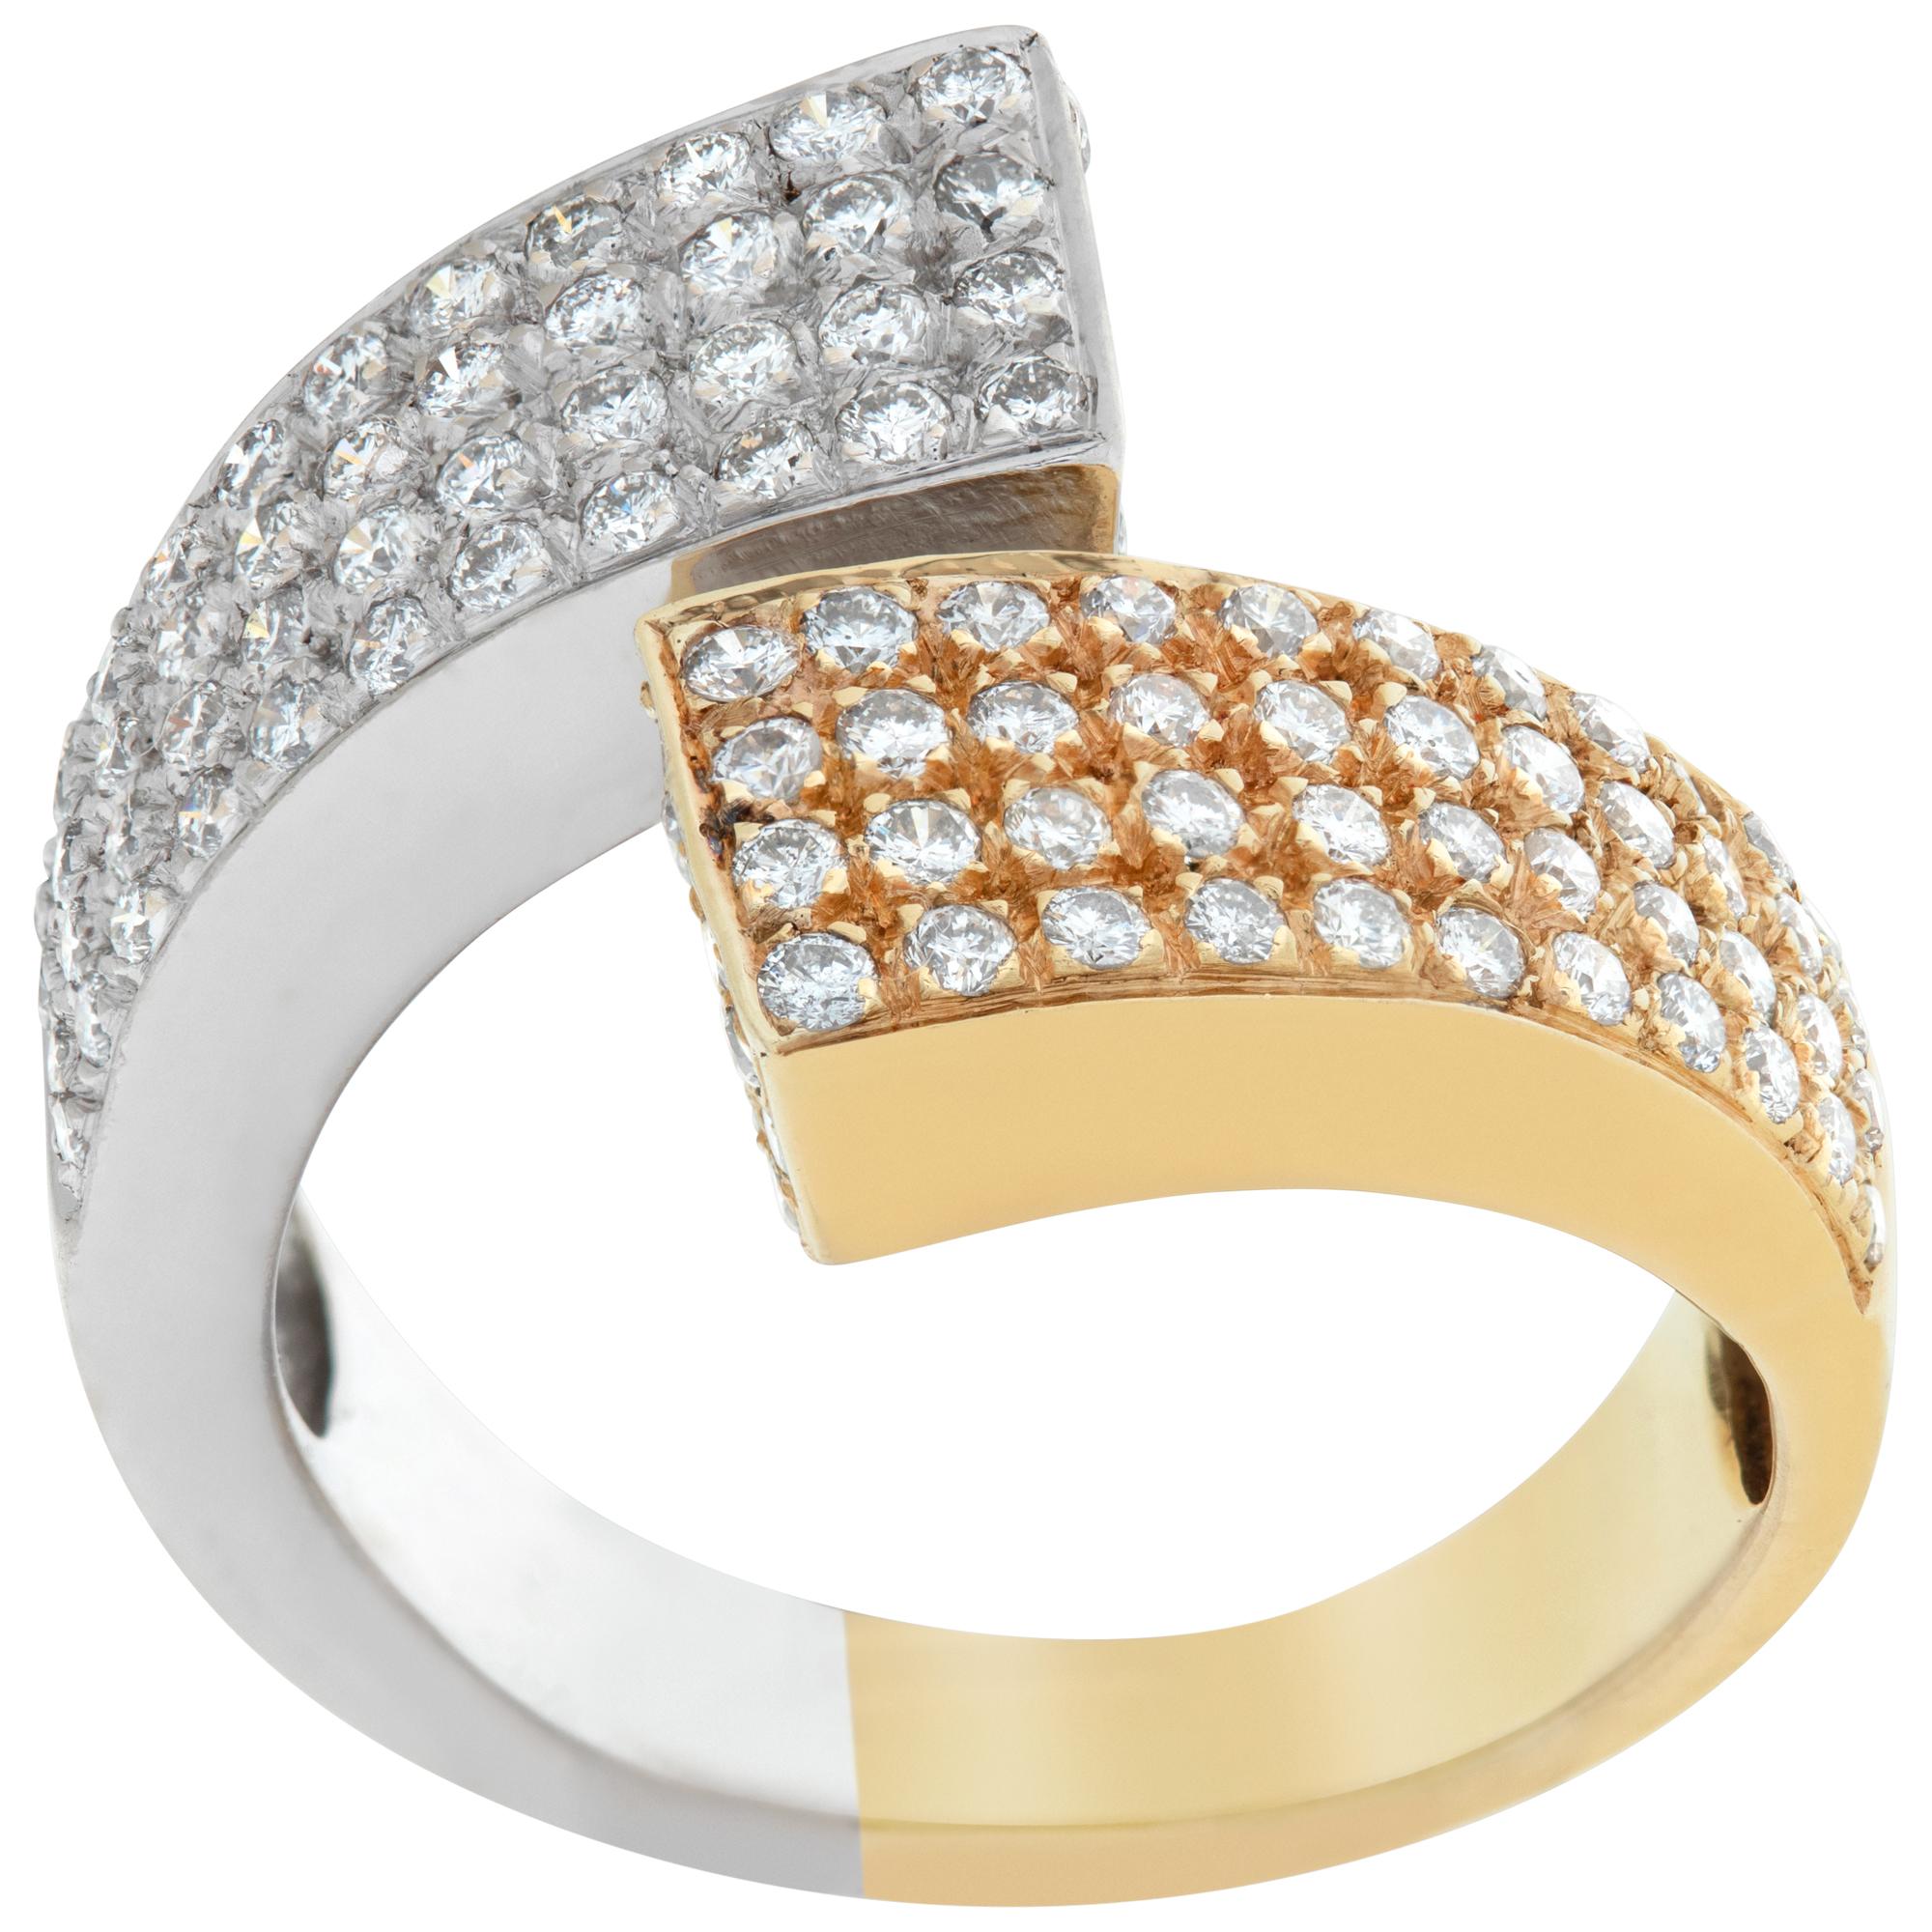 Sparkling diamond ring in 18k white & yellow gold with approx. 1.4 carats in brilliant cut diamonds. Size.6This Diamond ring is currently size 6 and some items can be sized up or down, please ask! It weighs 4.9 pennyweights and is 18k White & Yellow